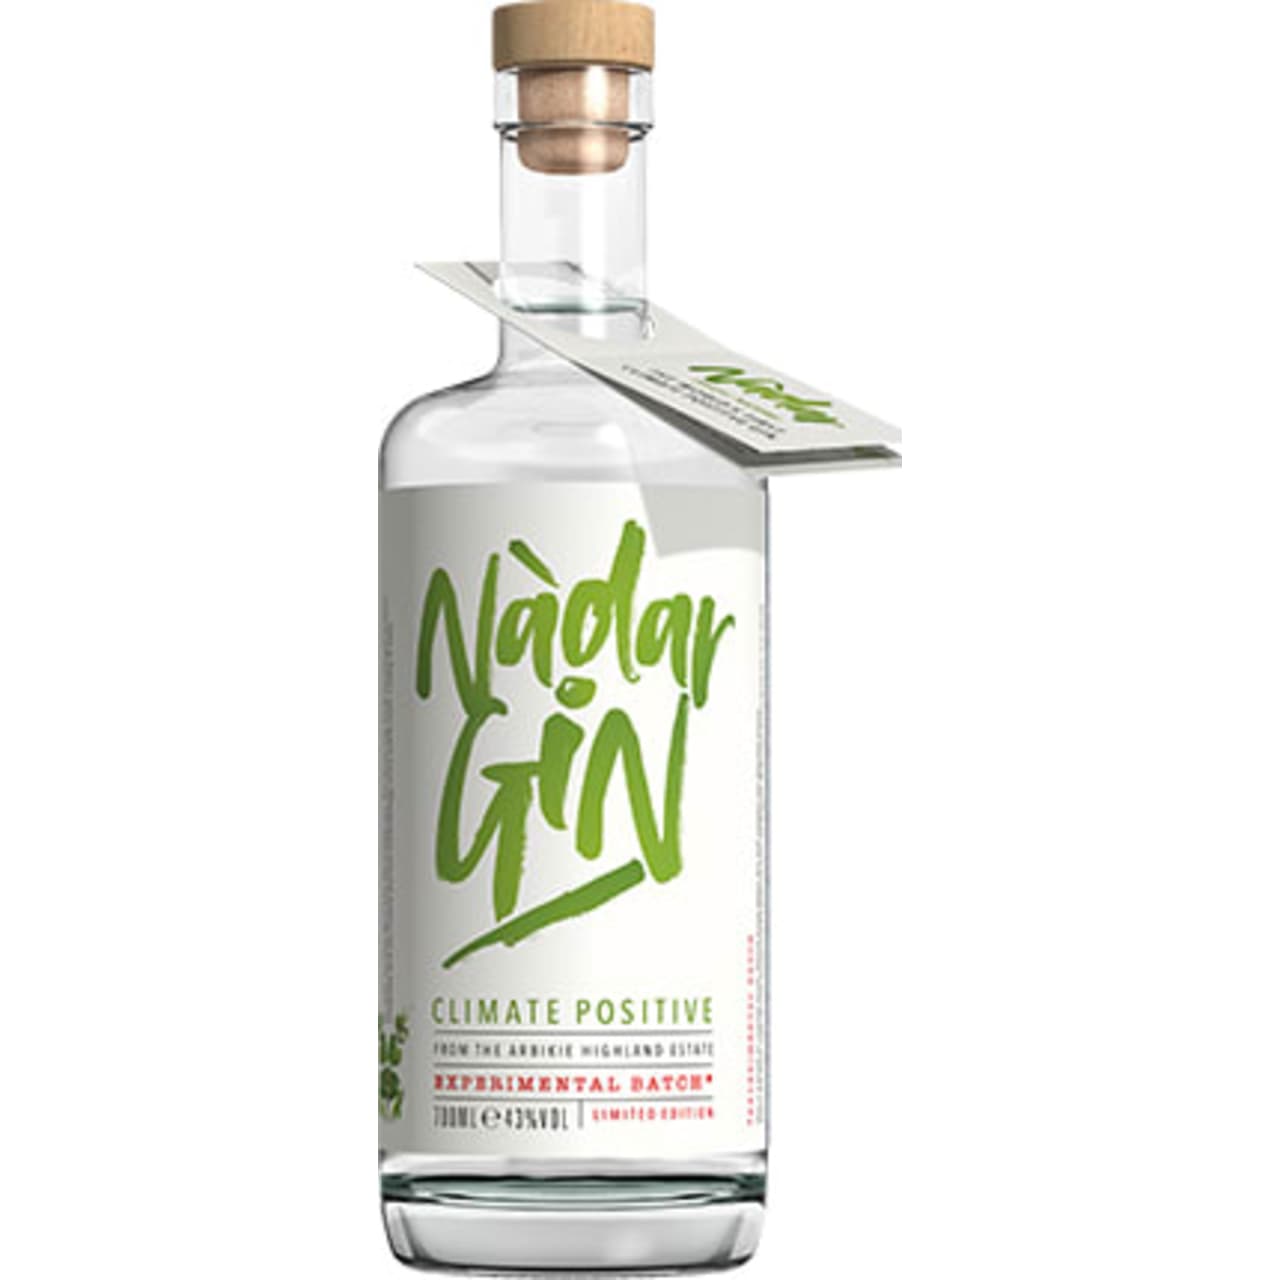 Nàdar Gin harnesses the power of nature and science to create this world first spirit. With a carbon footprint of -1.54 kg CO2e per 700ml bottle.